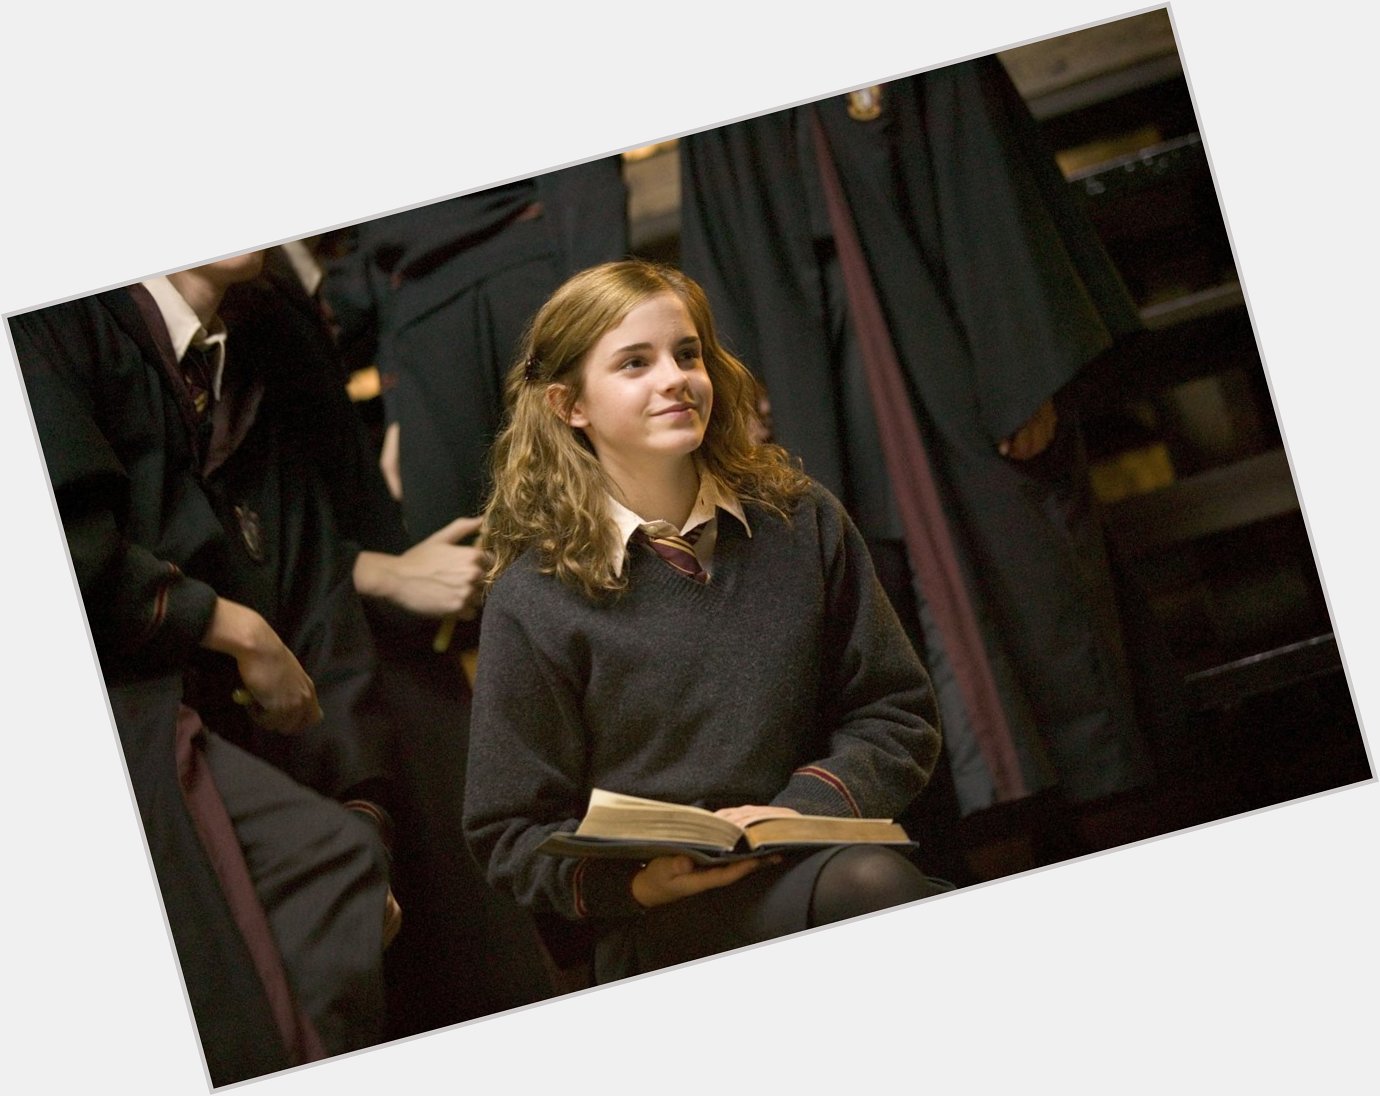 Smart, opinionated and a loyal friend through it all. Happy birthday, Hermione Granger! 